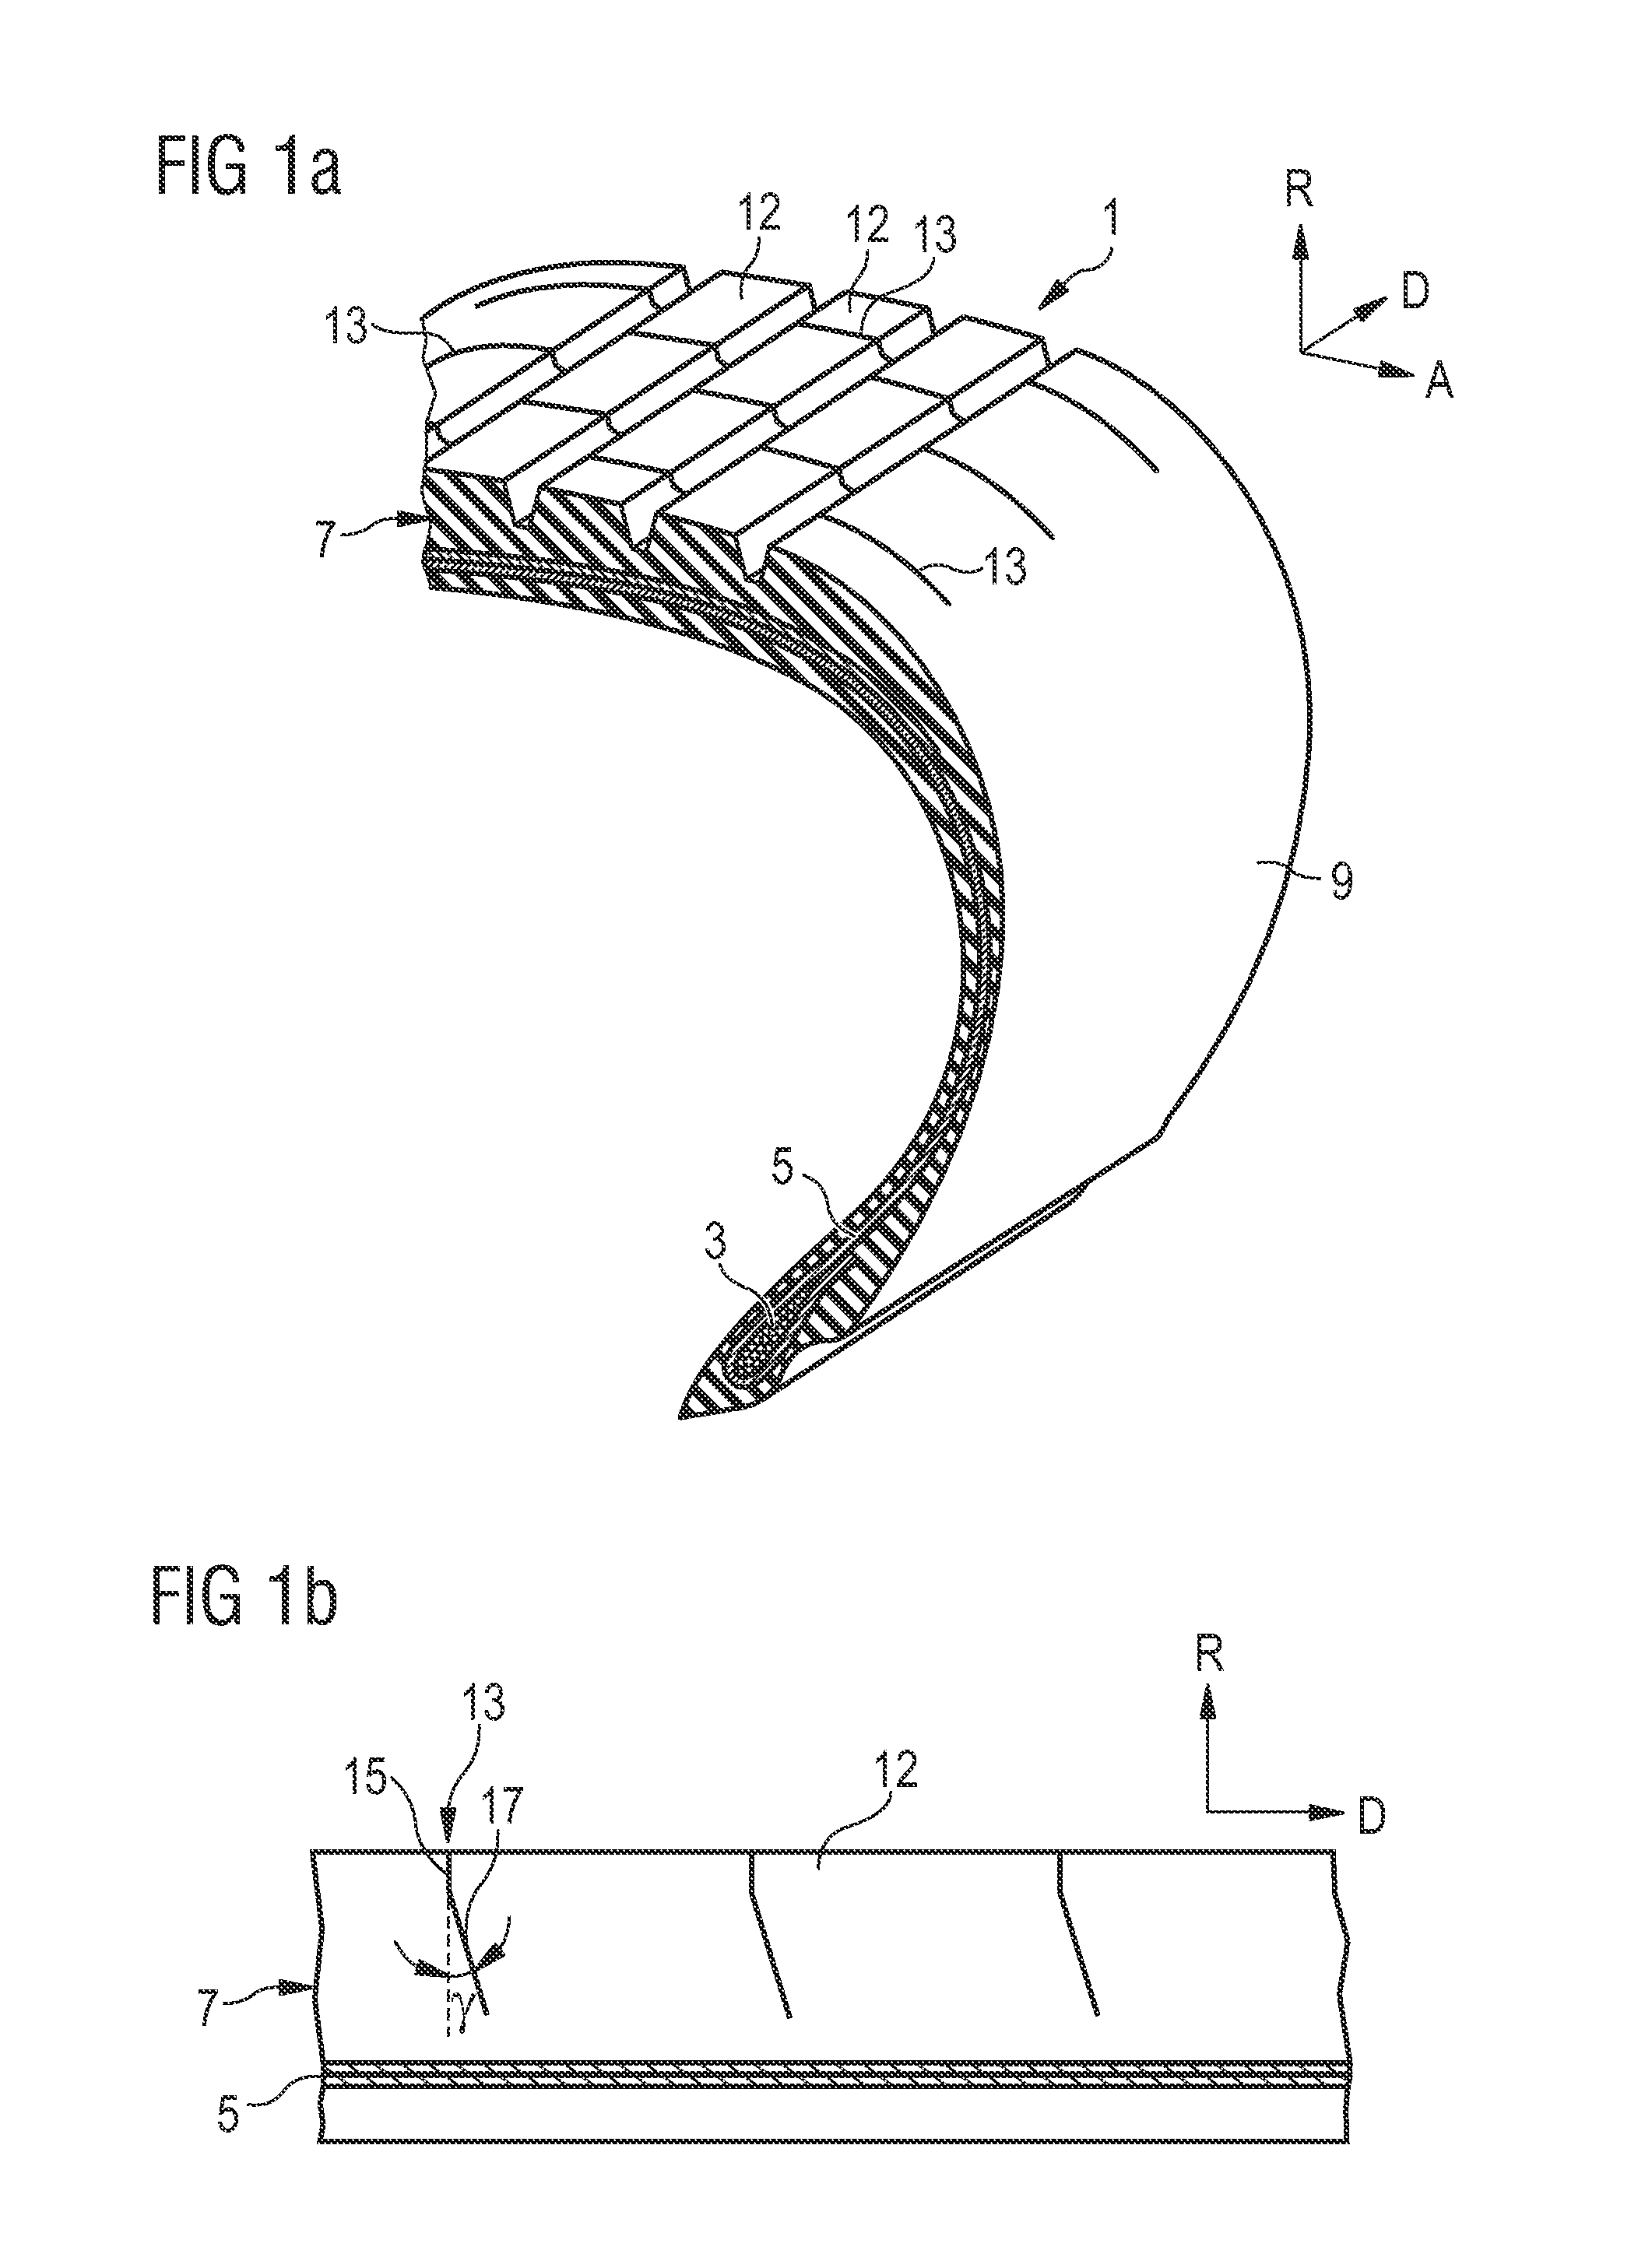 Pneumatic tire with tread having sipes